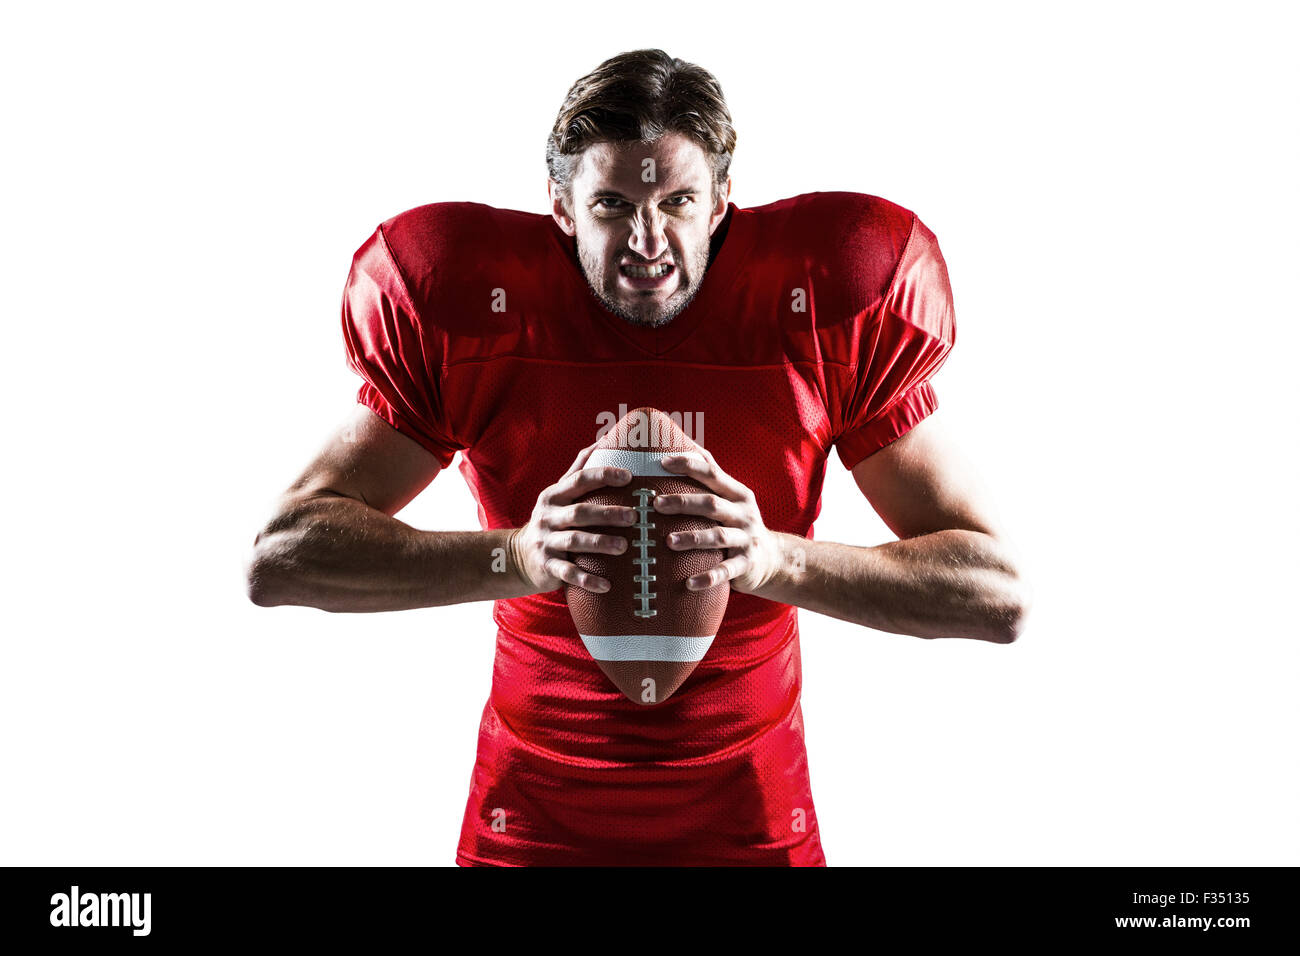 Angry American football player in red jersey holding ball Stock Photo -  Alamy